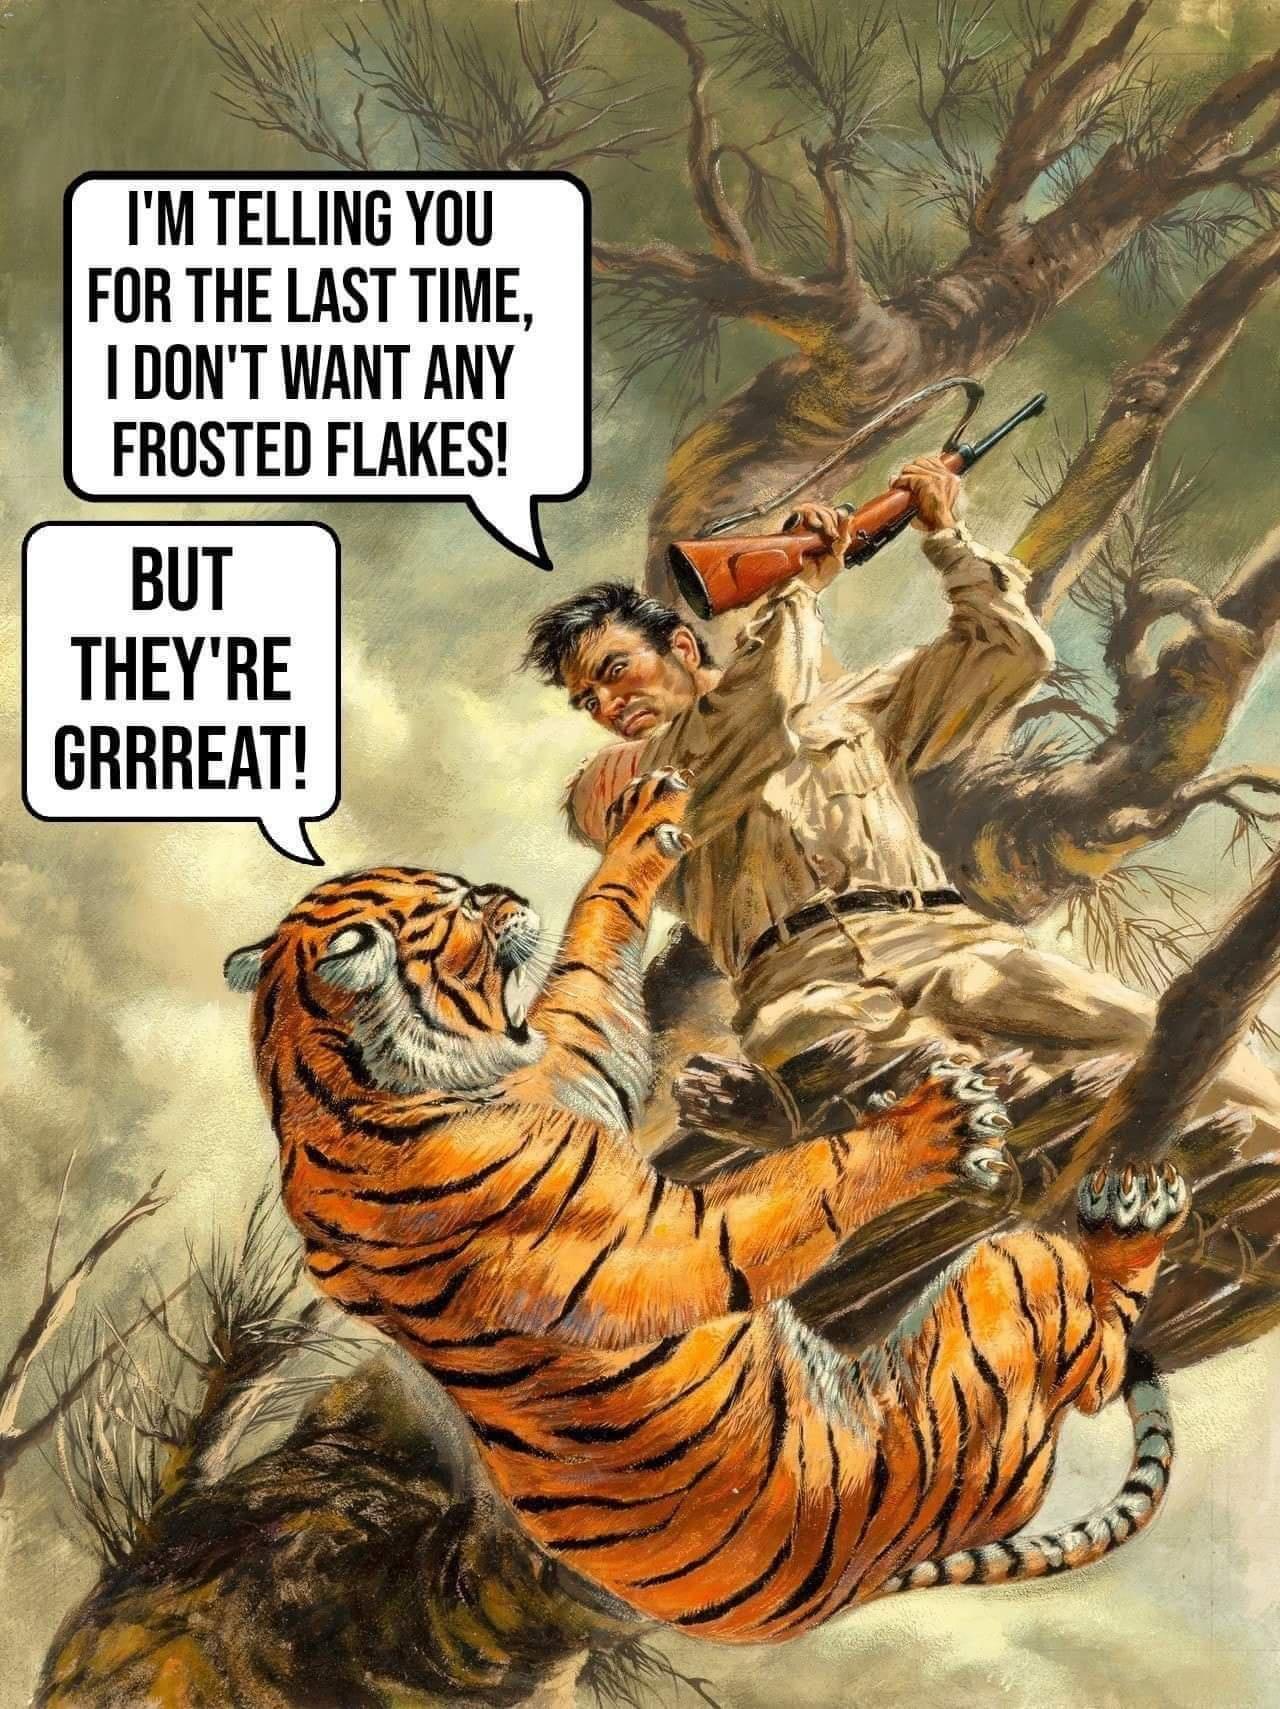 funny memes - calvin and hobbes memes - I'M Telling You For The Last Time, I Don'T Want Any Frosted Flakes! But They'Re Grrreat!